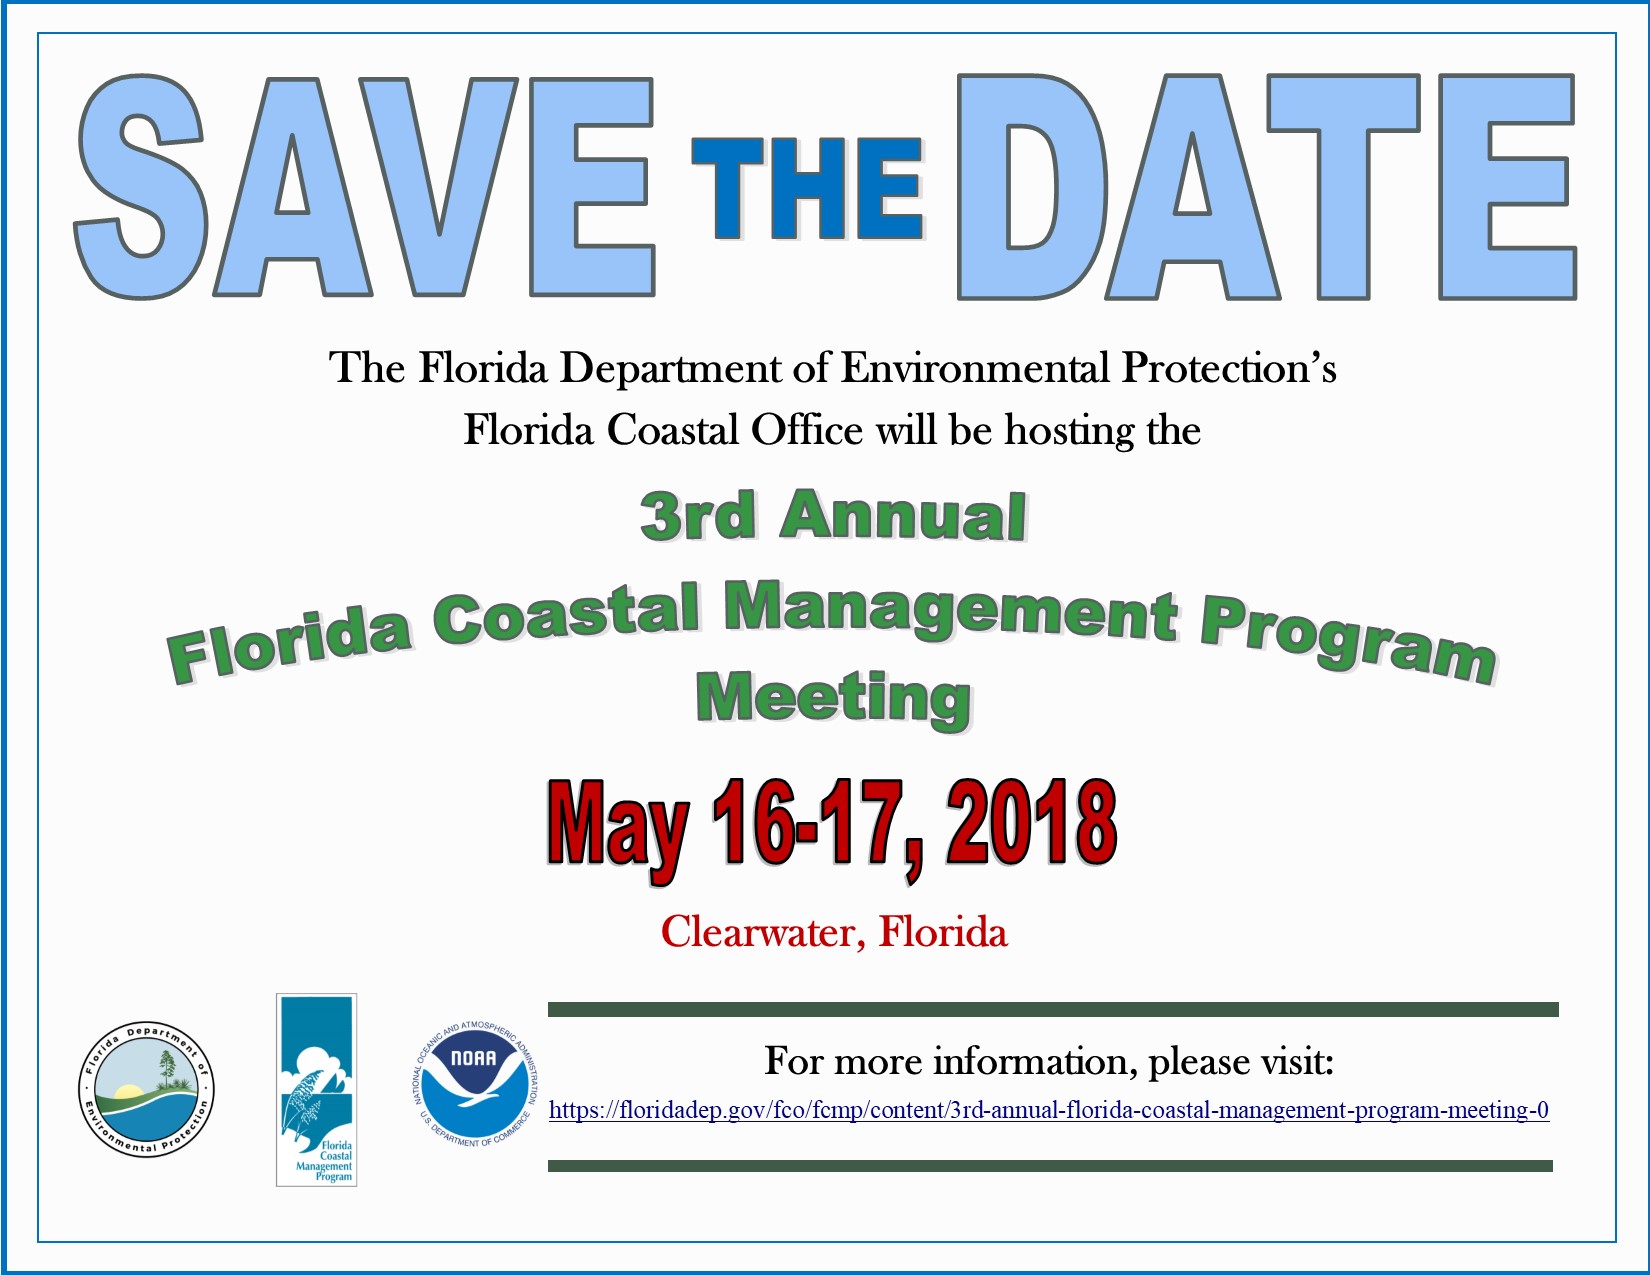 A Save the Date graphic announcing the 3rd Annual, Florida Coastal Management Program meeting hosted May 16 through May 17, 2018 in Clearwater Florida.